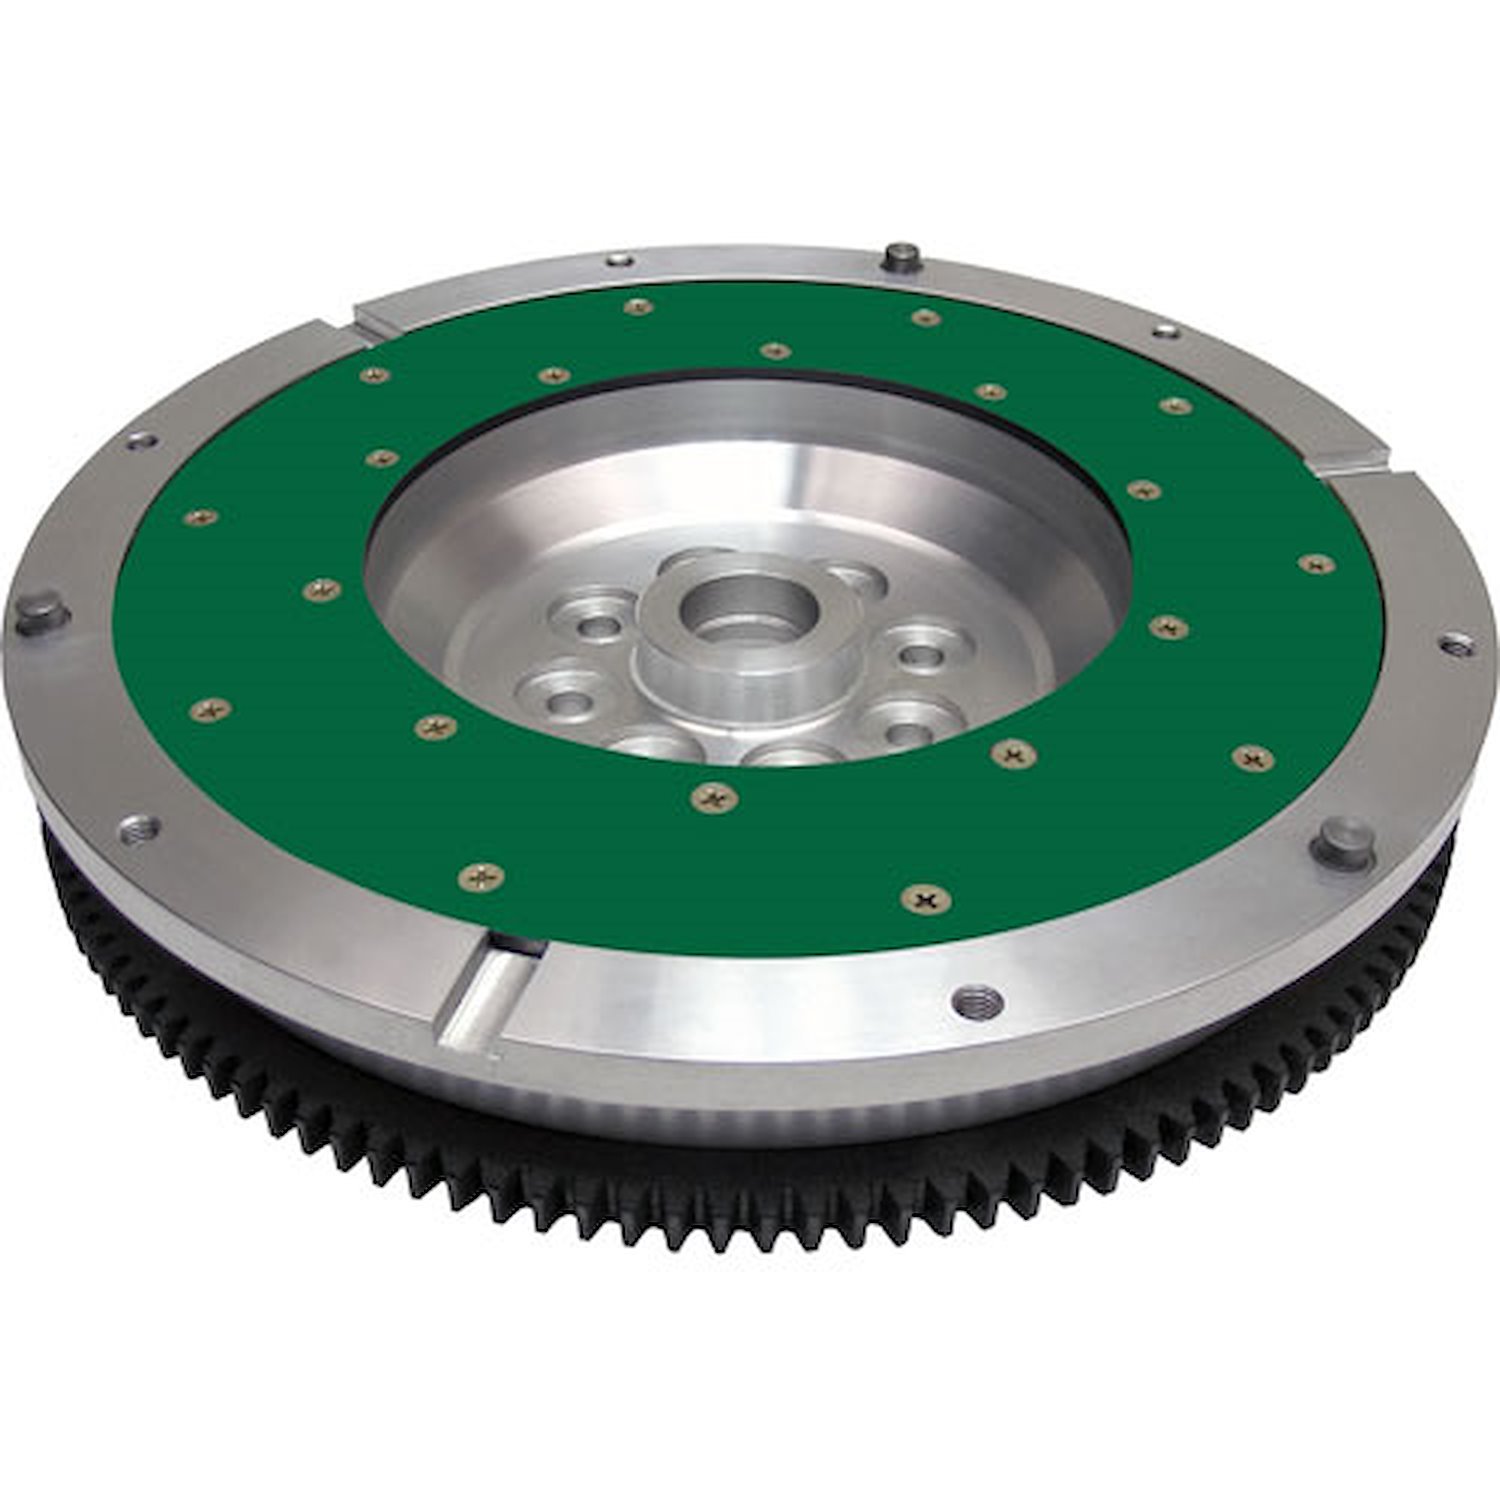 Engineering Corp. - Flywheel-Aluminum PC To26 High Performance Lightweight with Replaceable Friction Plate